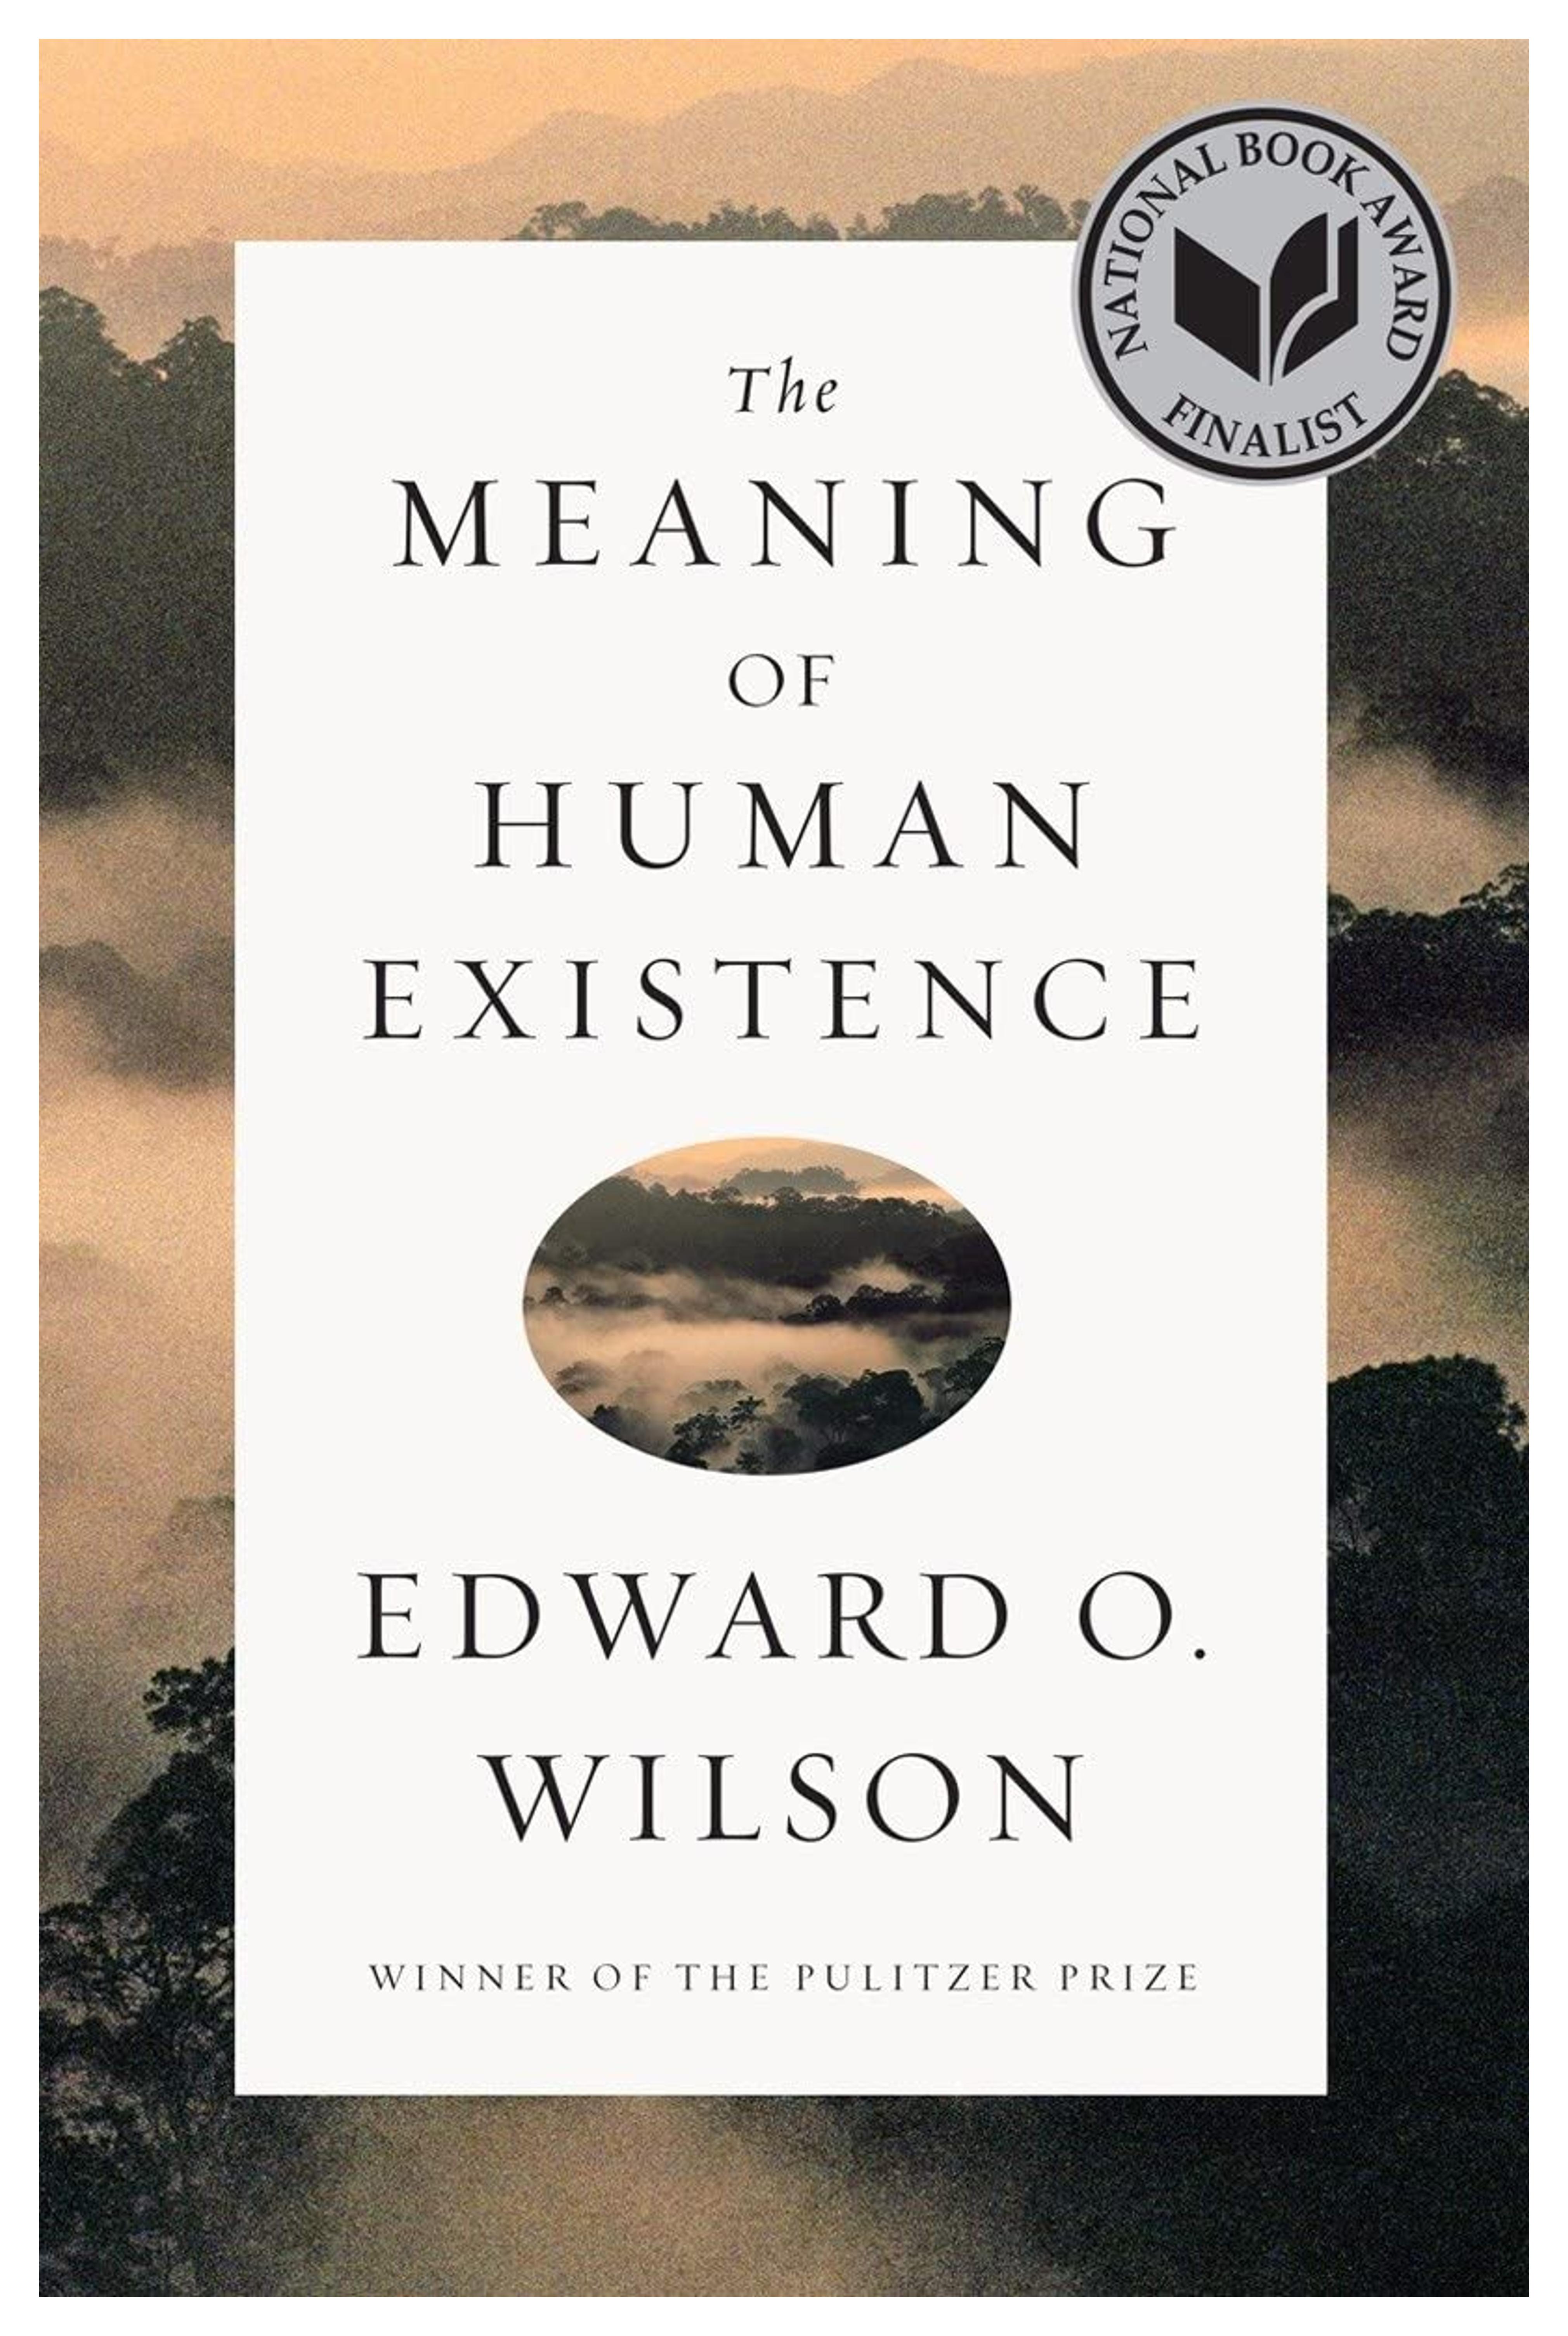 The Meaning of Human Existence